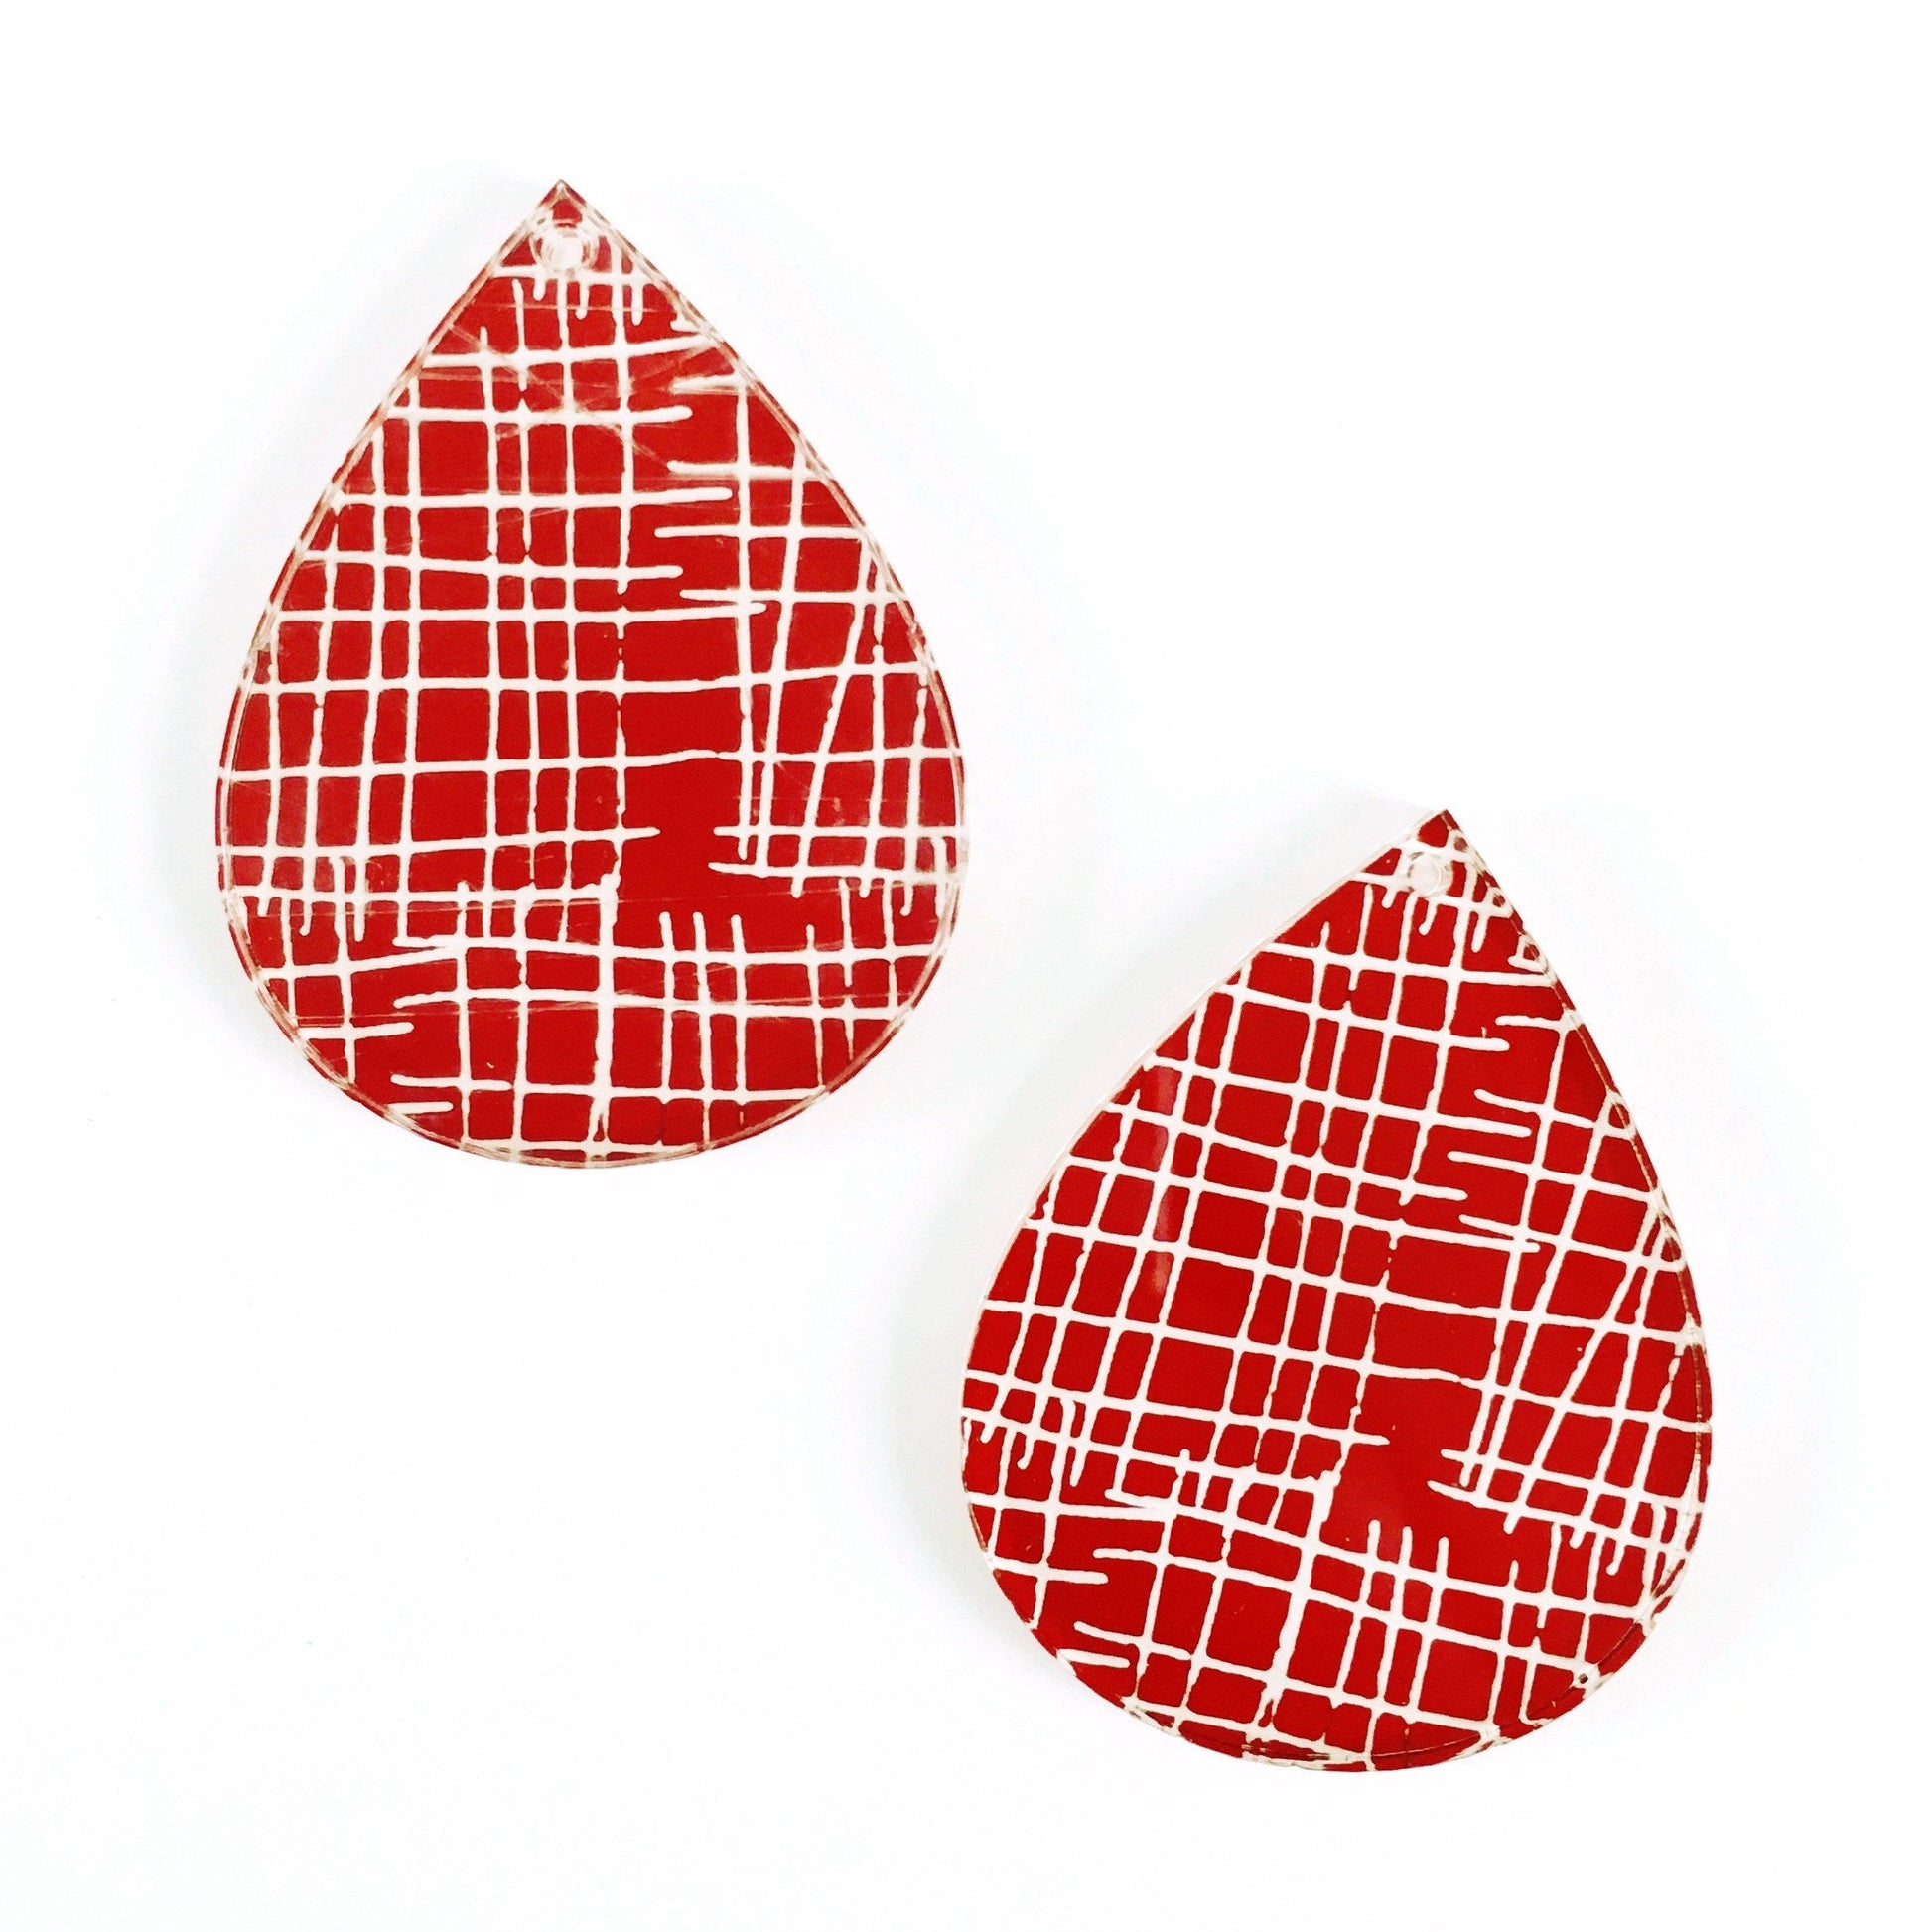 Crafty Cuts Laser Deluxe_ etched Grid Deluxe: 2 pairs 40mm Teardrops - 4 Designs